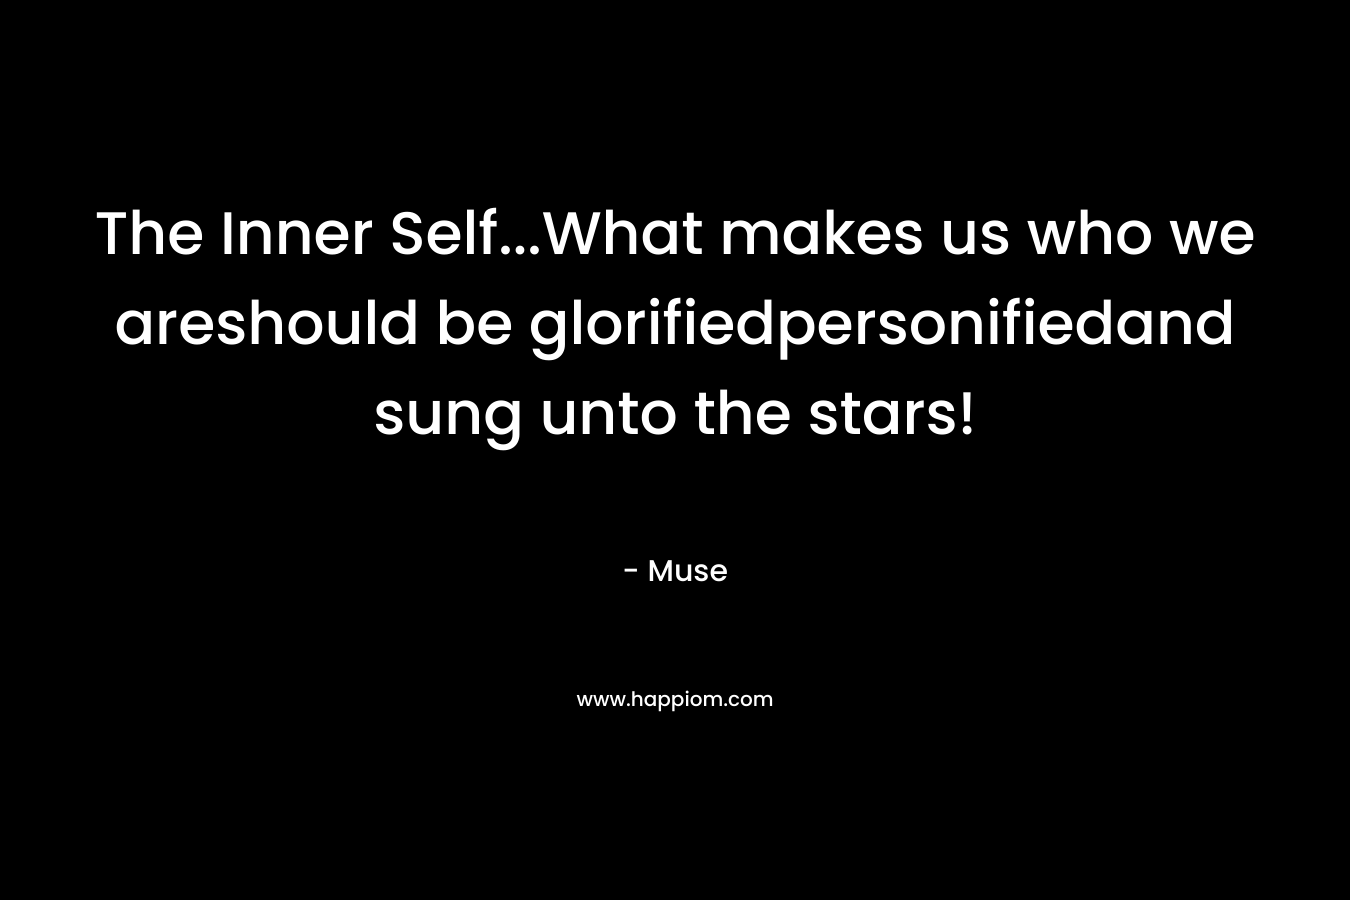 The Inner Self…What makes us who we areshould be glorifiedpersonifiedand sung unto the stars! – Muse